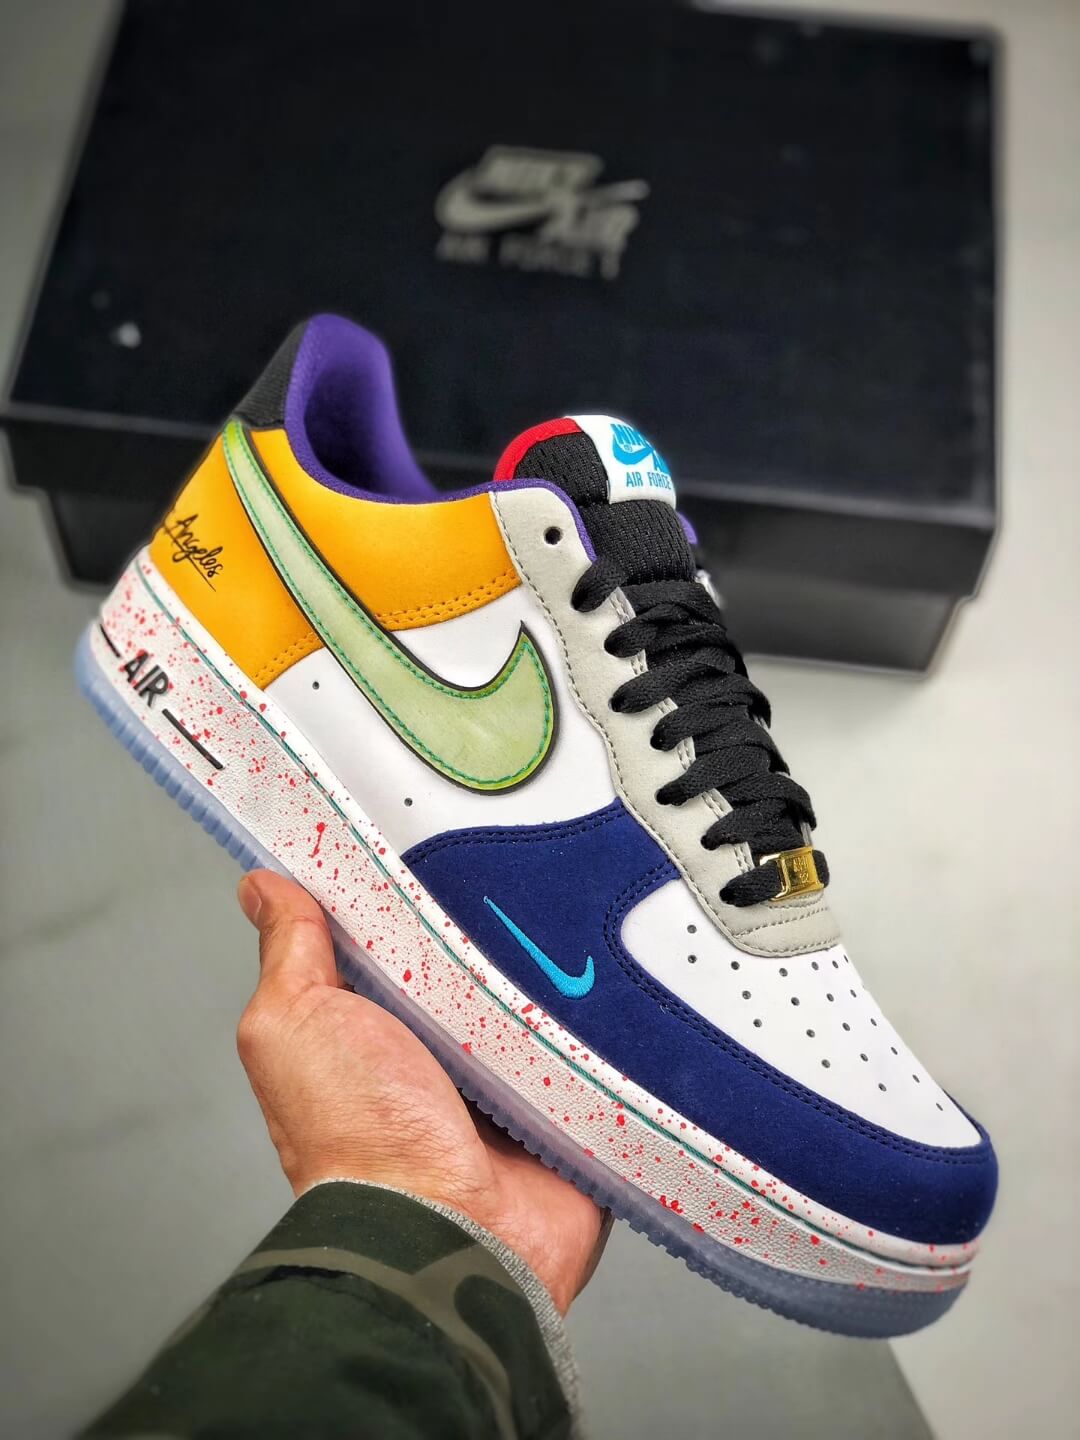 The Nike Air Force 1 07 LV8 What The LA Multi Color Sneaker Top Replica Shoes 01